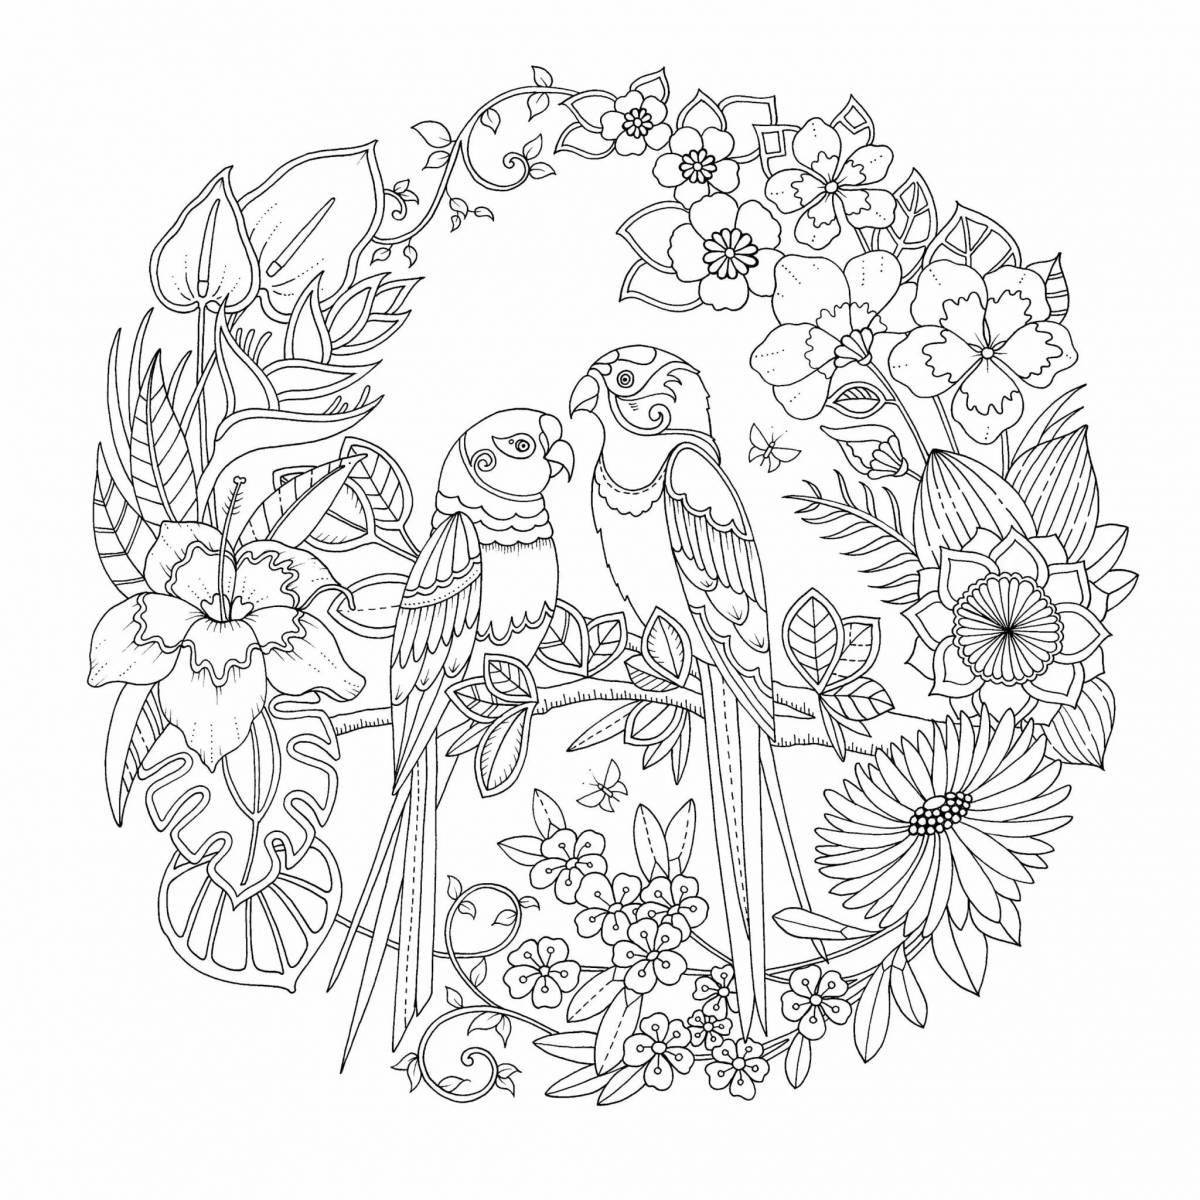 Merry spring anti-stress coloring book